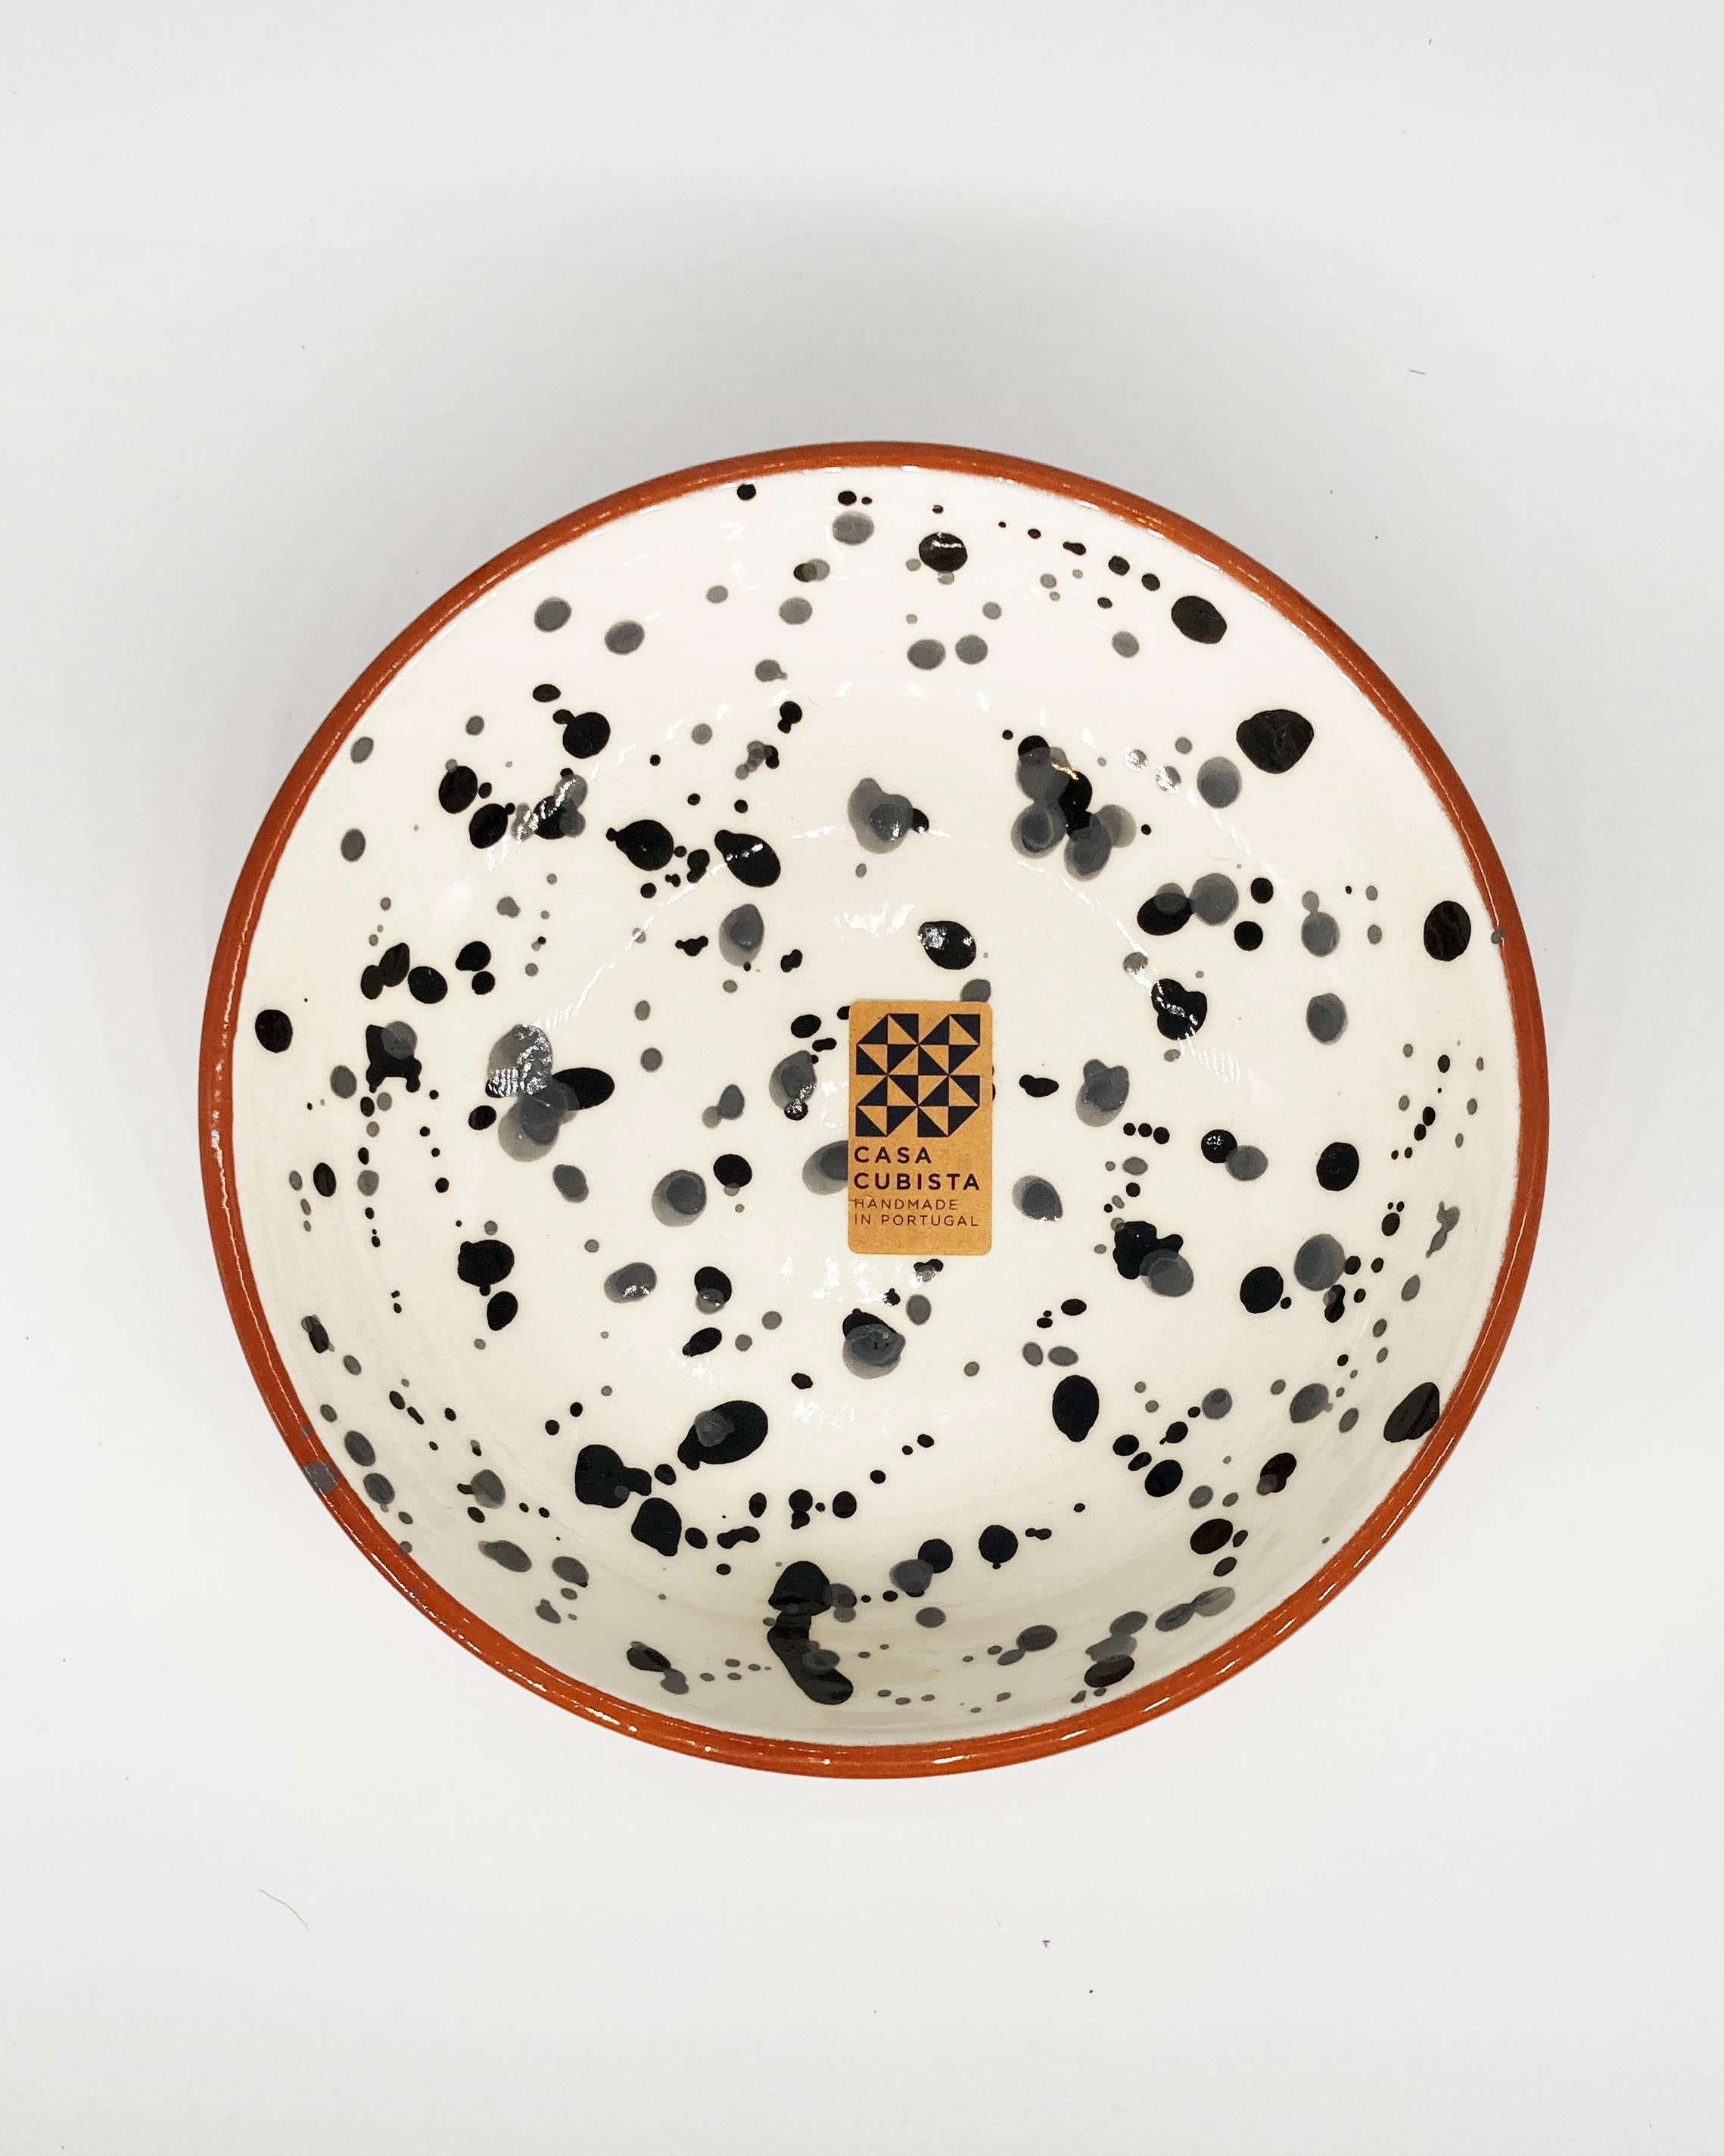 Handmade and hand painted ceramics from one of the mother countries, Portugal, these beautiful pieces for your table will add a modern and graphic touch and are perfect to mix and match. These splatter polkadot patterned bowls are part of a larger